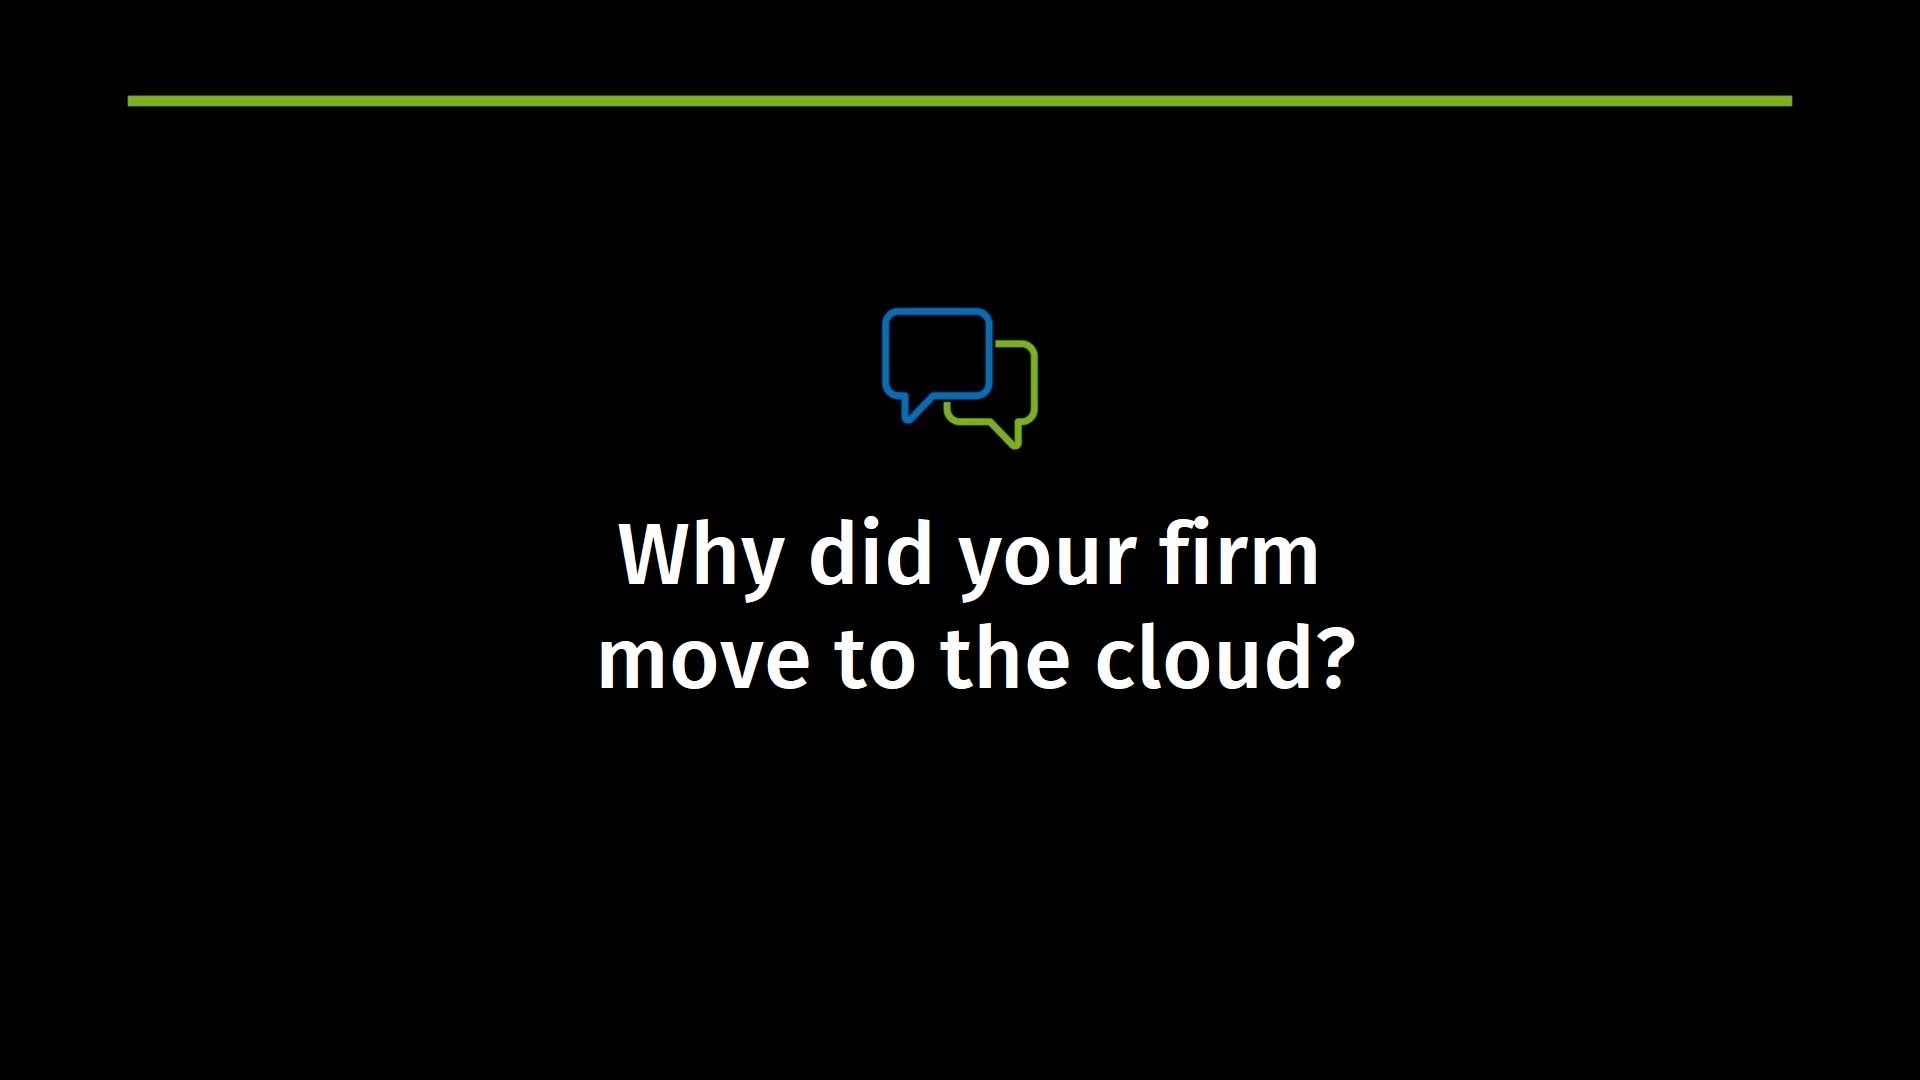 Why did your firm move to the cloud?